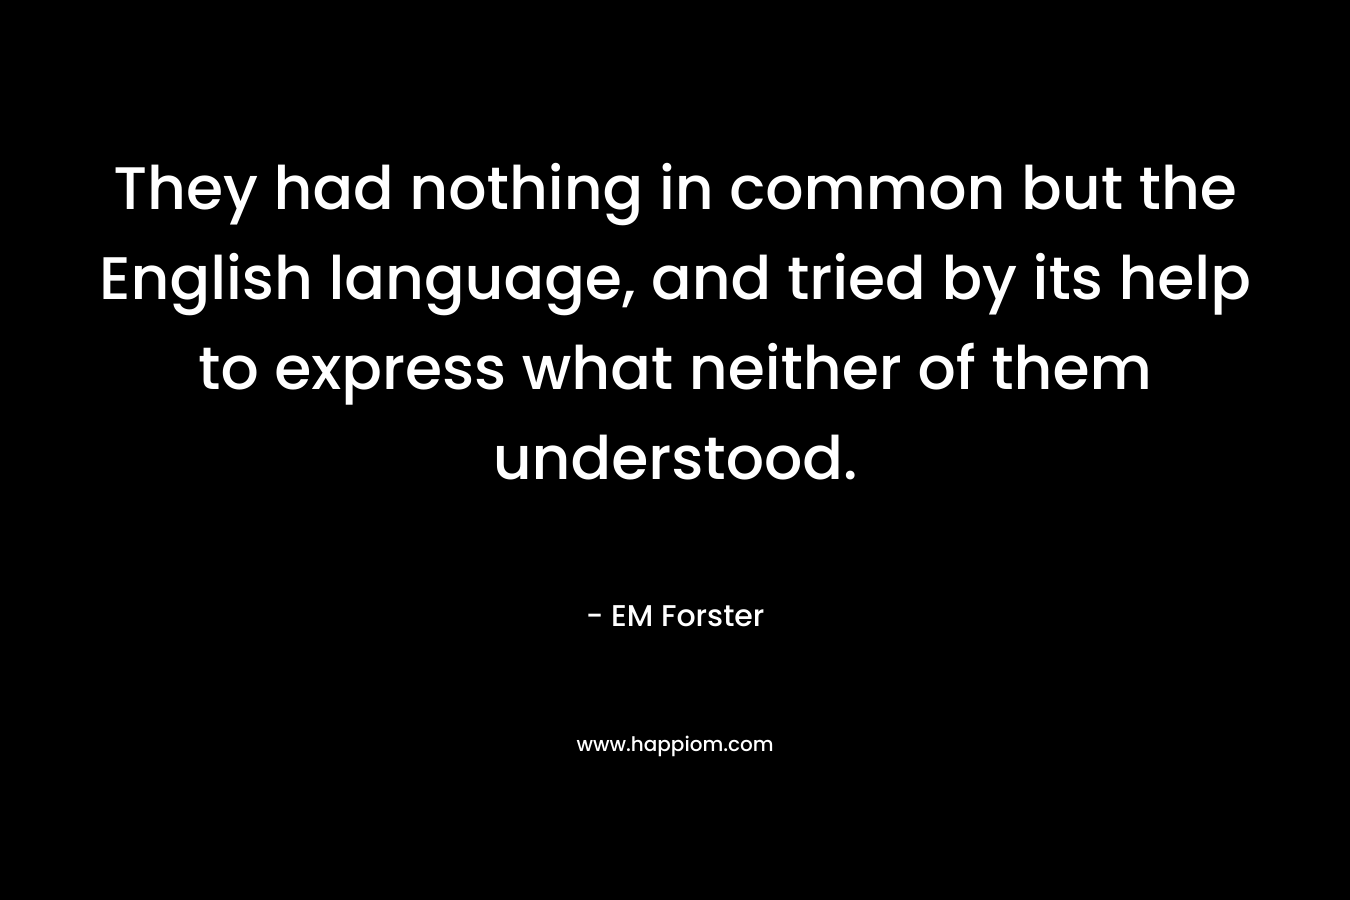 They had nothing in common but the English language, and tried by its help to express what neither of them understood.